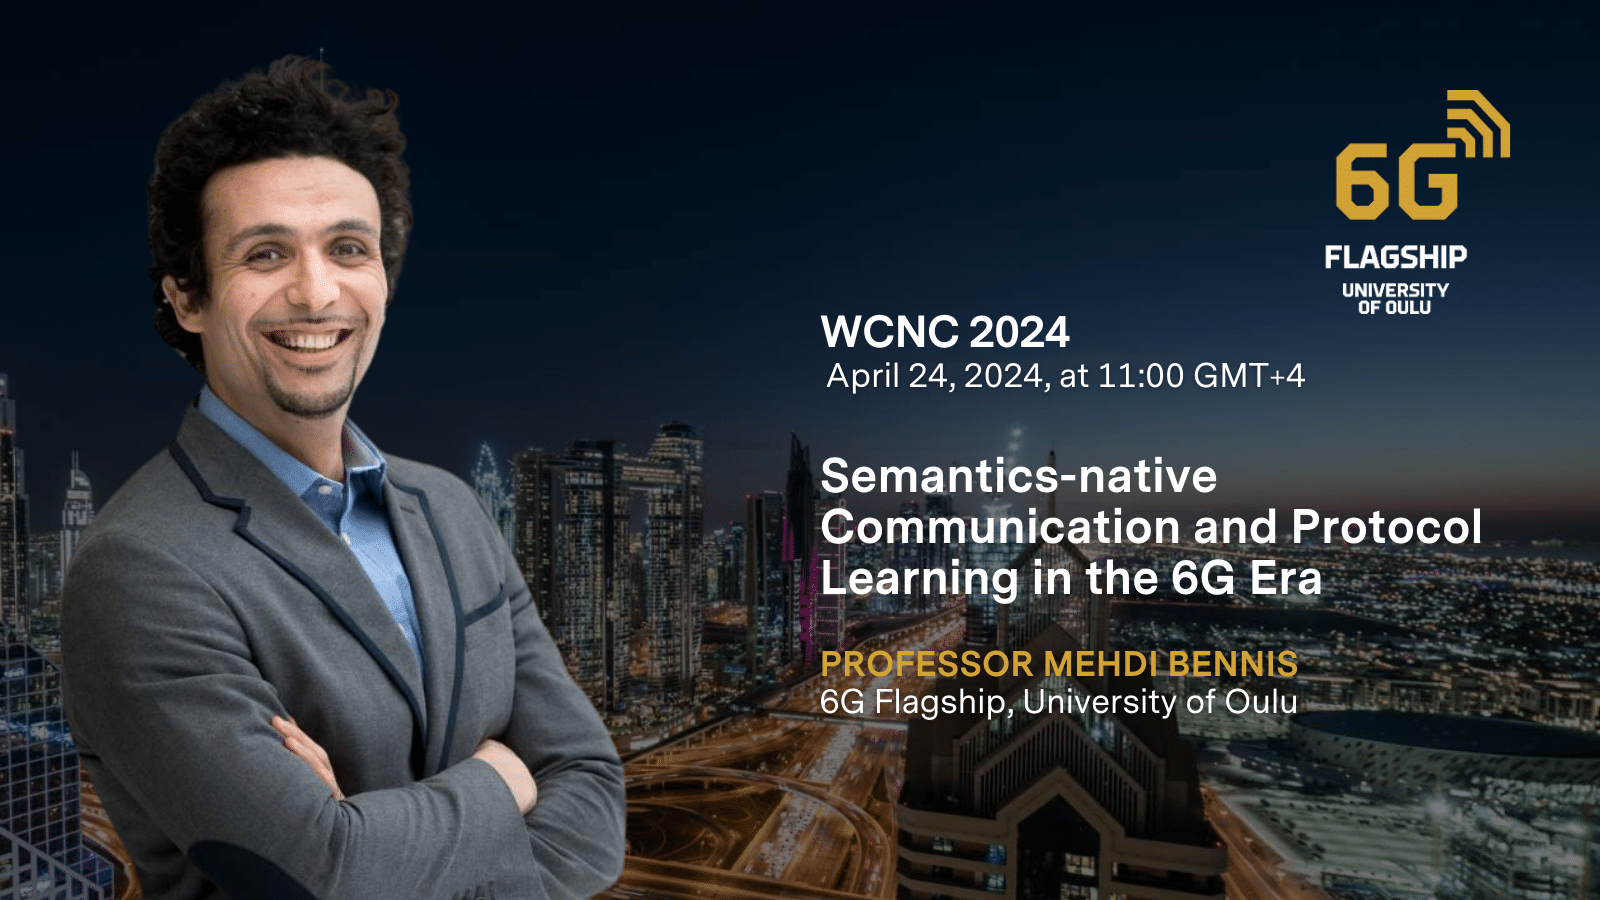 Promotional image for WCNC 2024 featuring Professor Mehdi Bennis of the 6G Flagship, University of Oulu, with the Dubai skyline in the background. Text overlay announces his keynote on 'Semantics-native Communication and Protocol Learning in the 6G Era' scheduled for April 24, 2024.